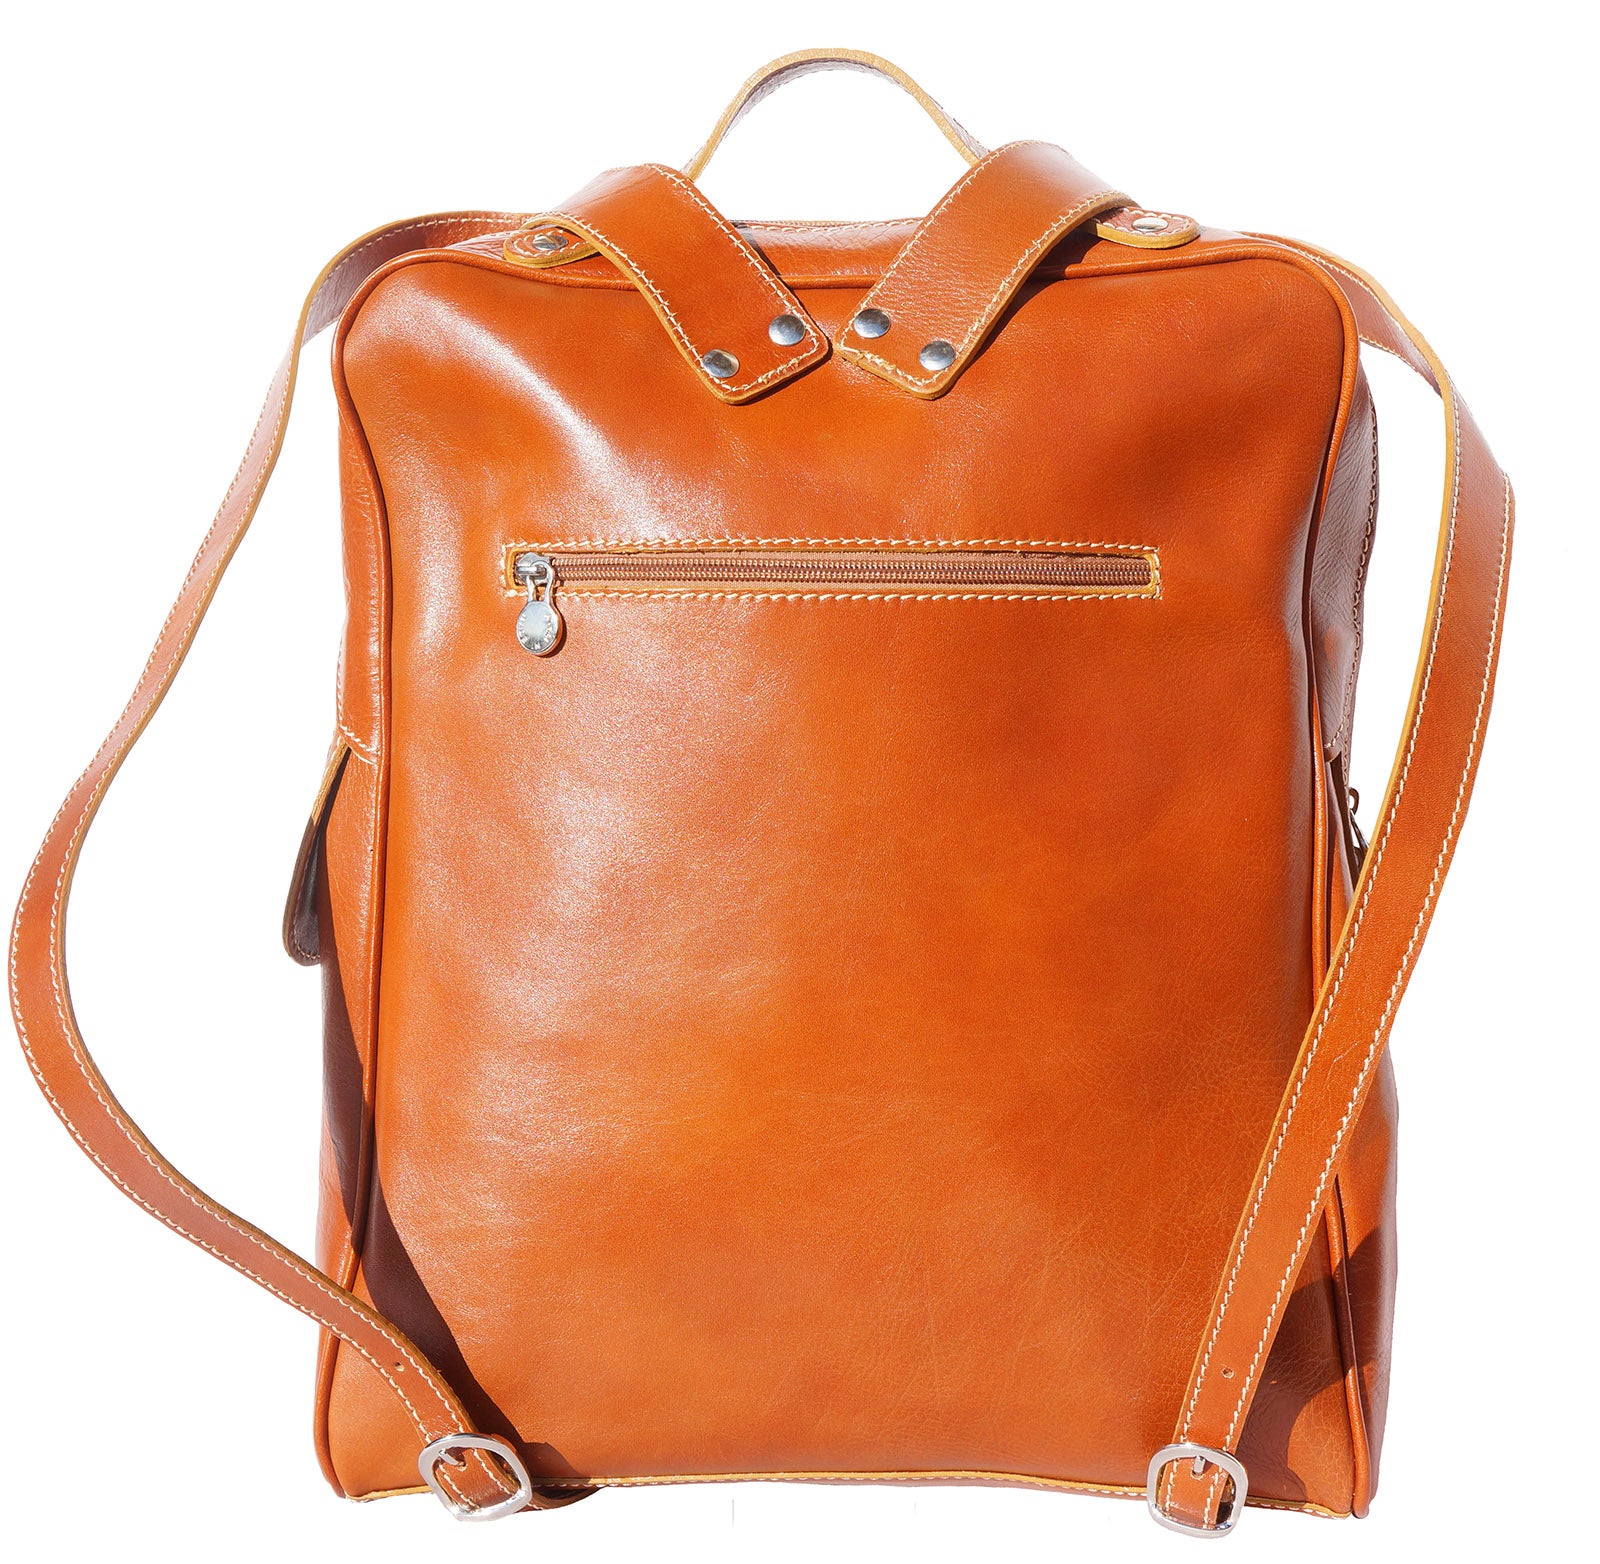  Gabriele GM Tan Leather Backpack Purse - back view